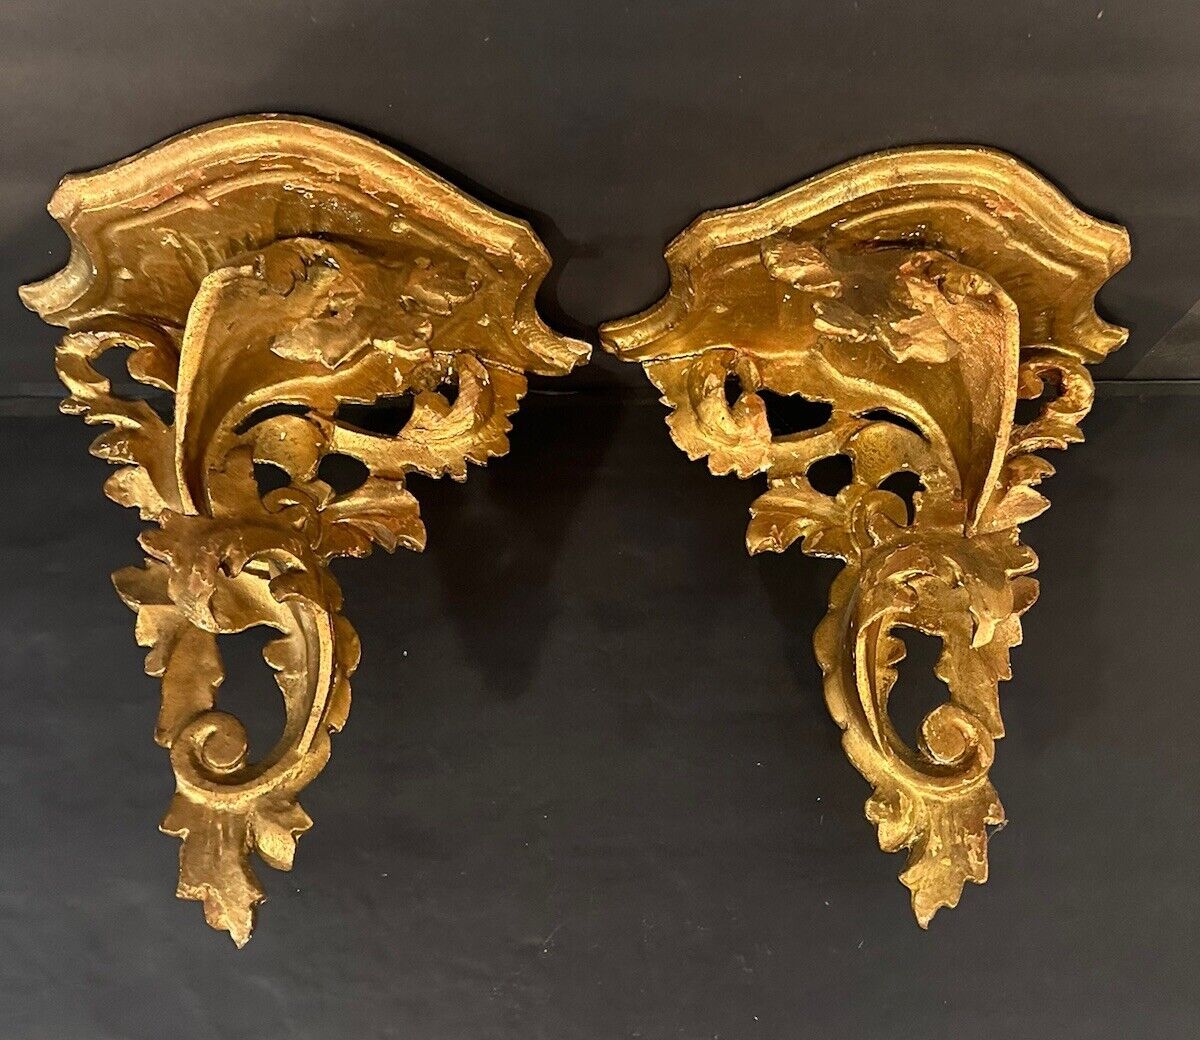 Antique Italian Florentine Gilt Wall Sconces Shelves Ornate Carved Wood Italy 2